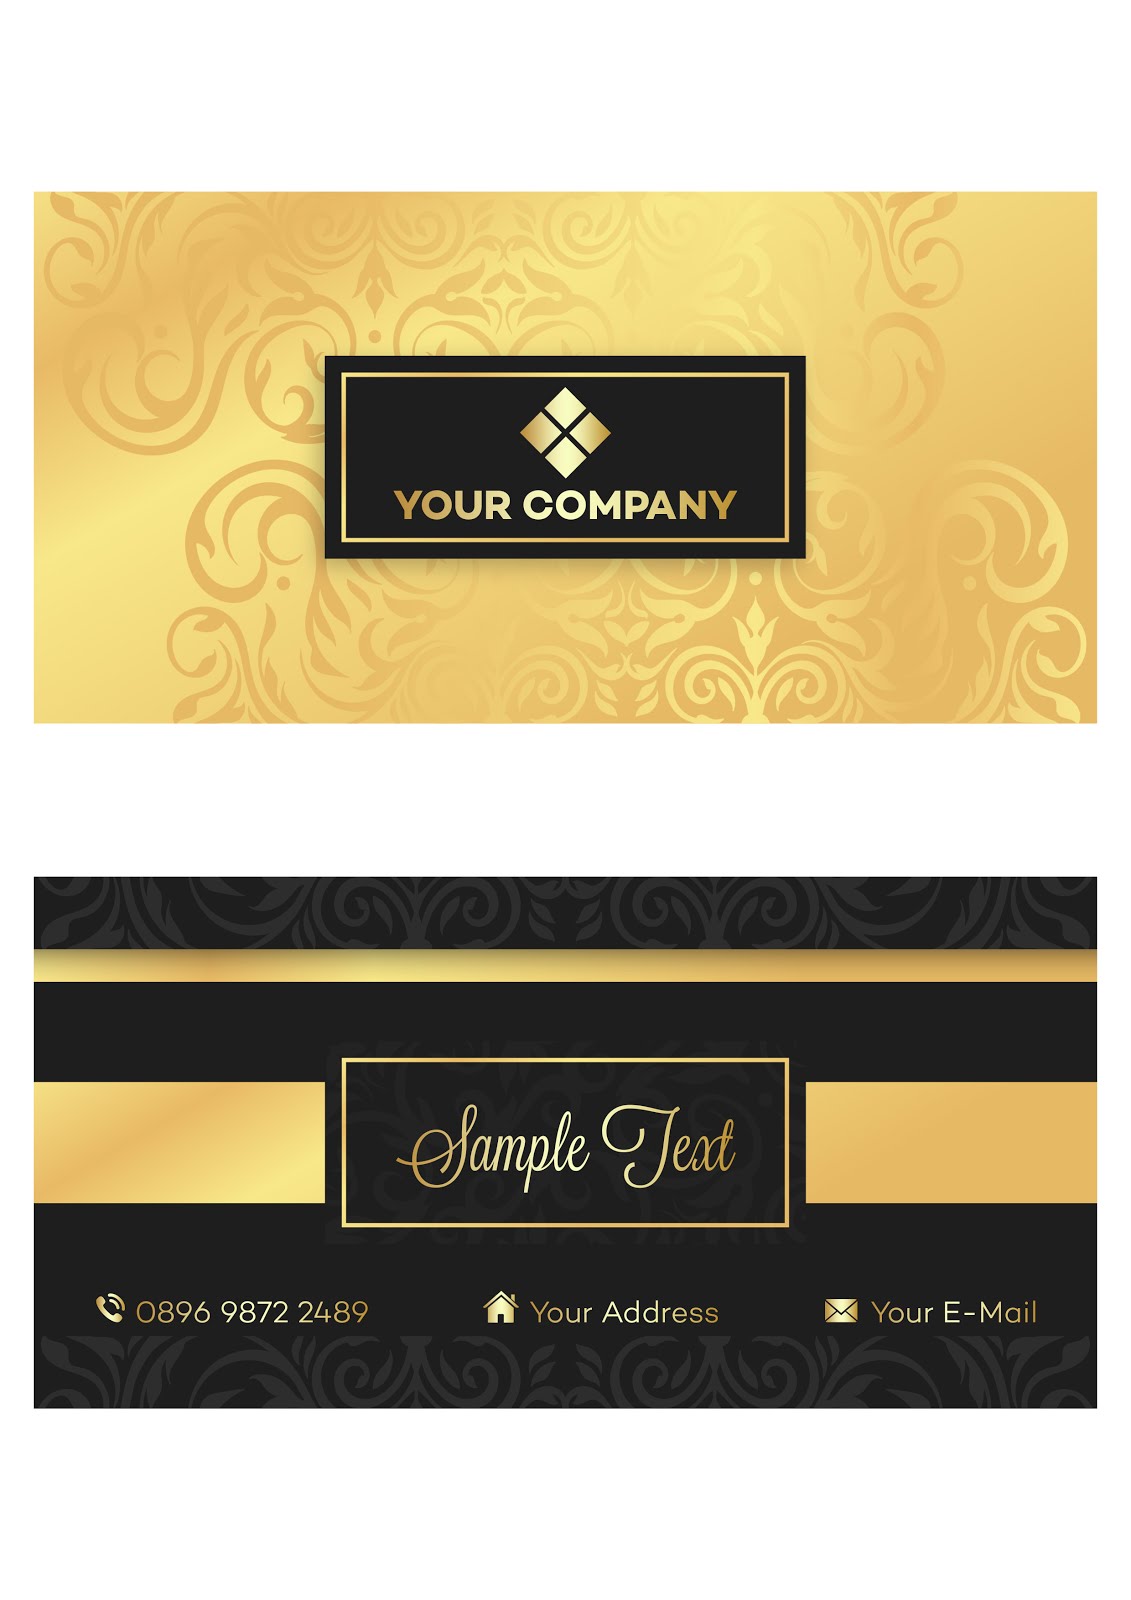 Download Template ID CARD Luxury Golden - Deka Productions